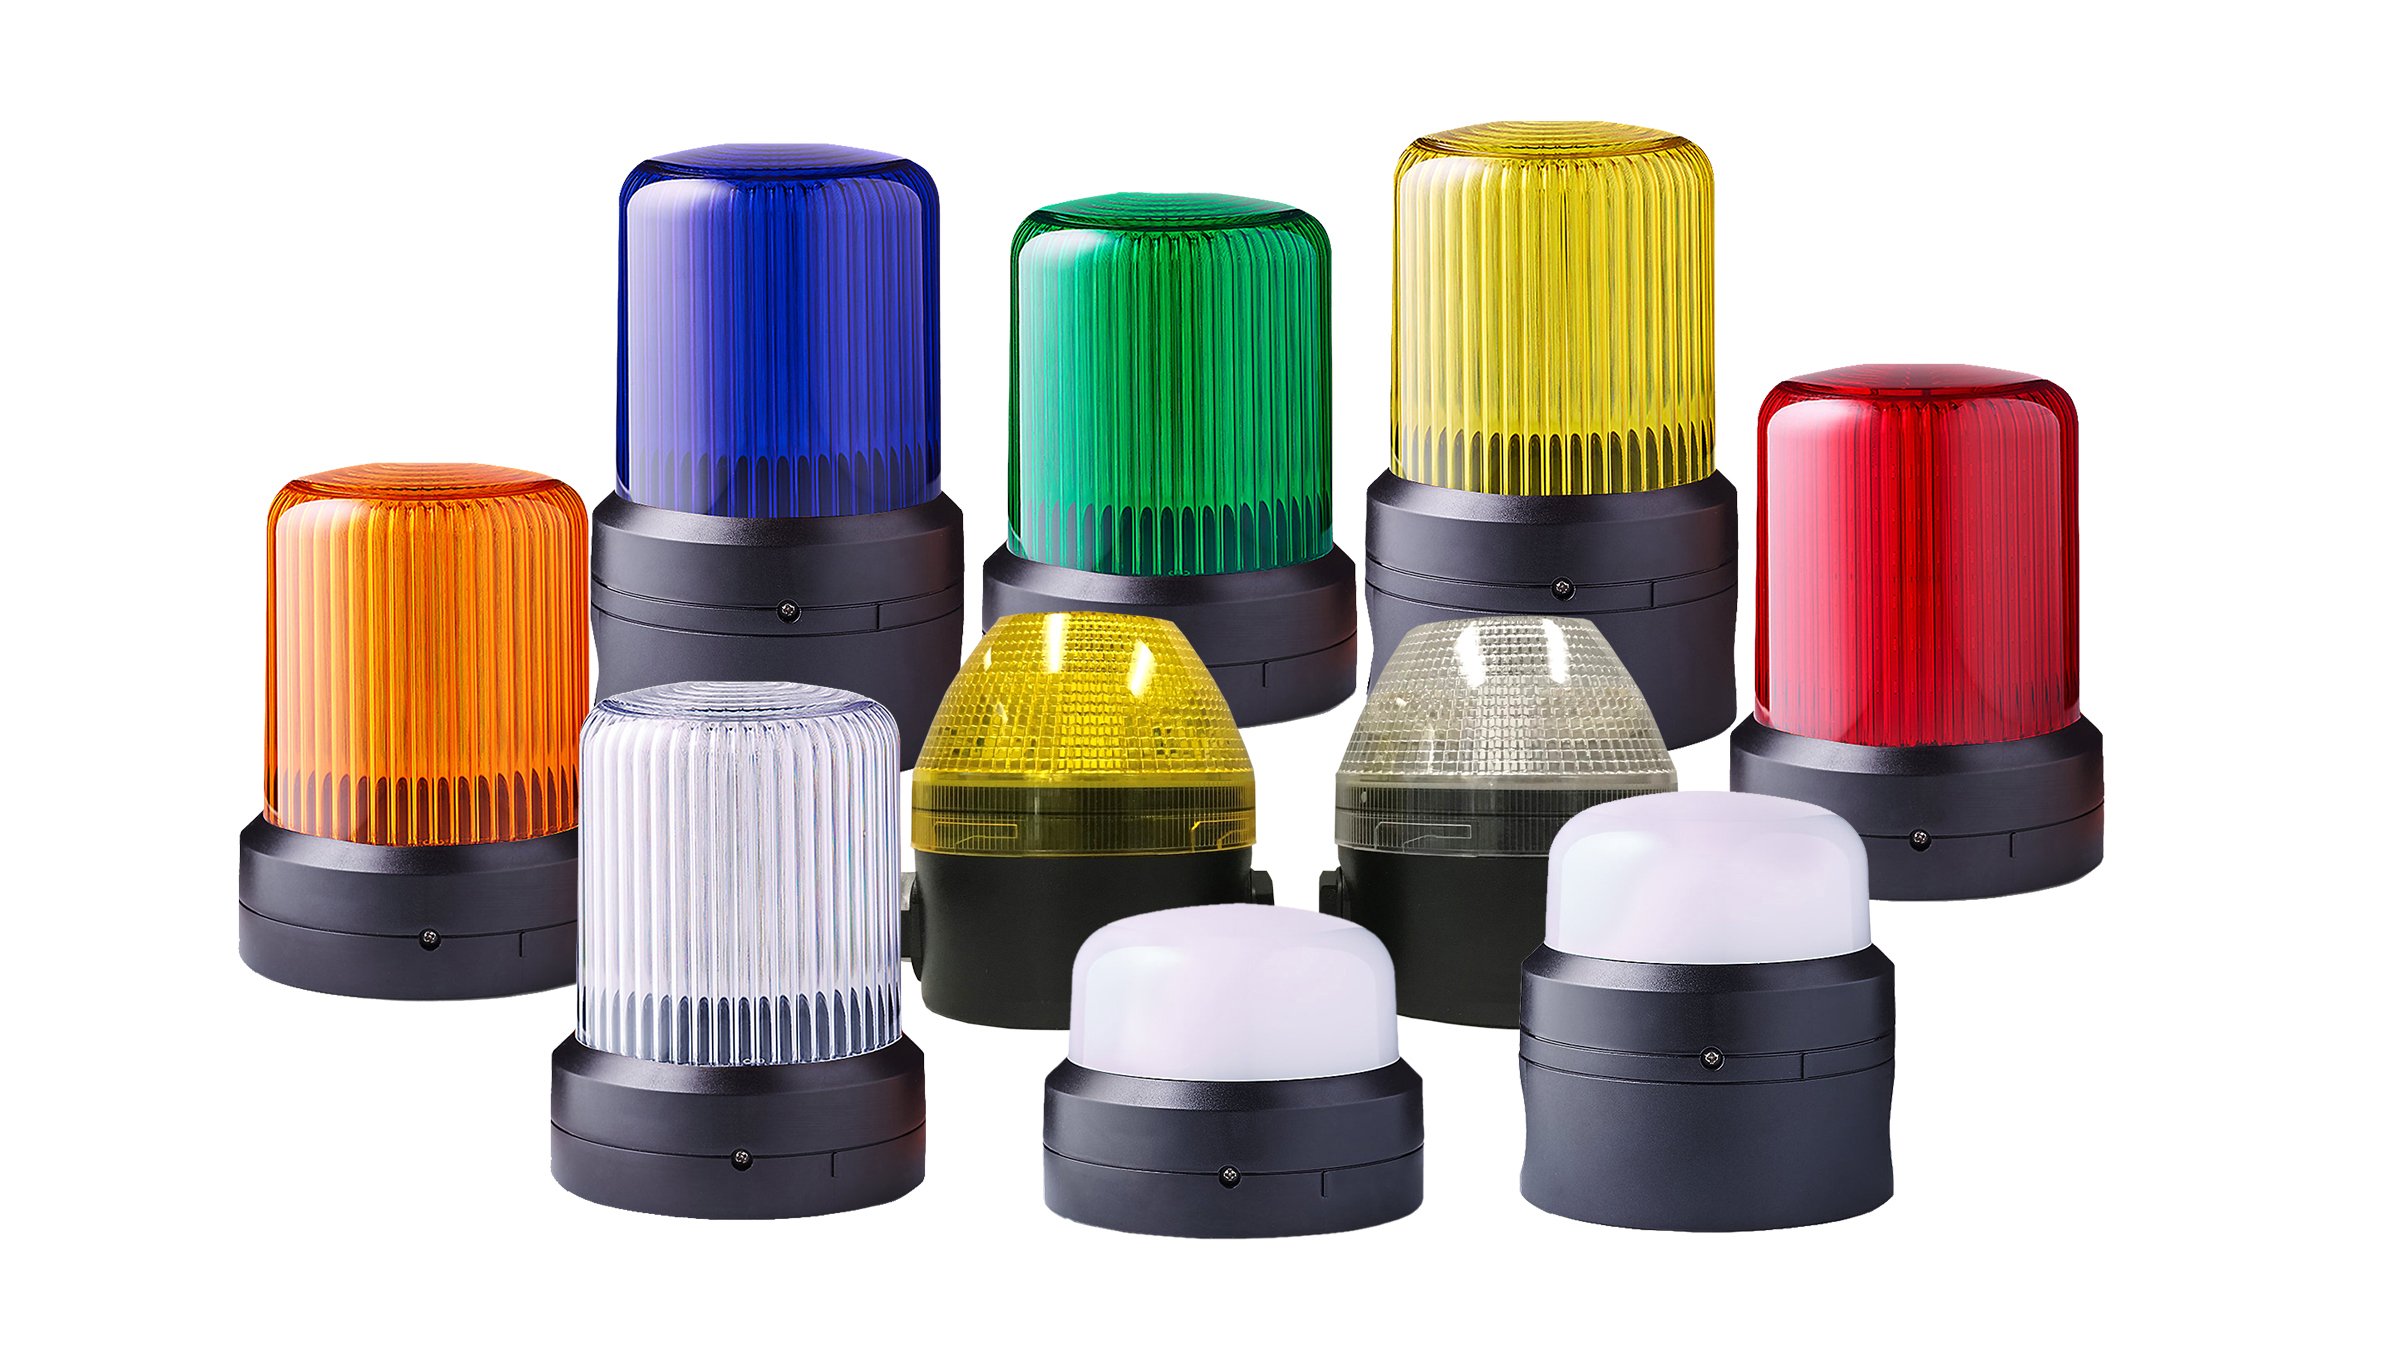 Family shot of various color and size configurations of round industrial beacons on black plastic bases.